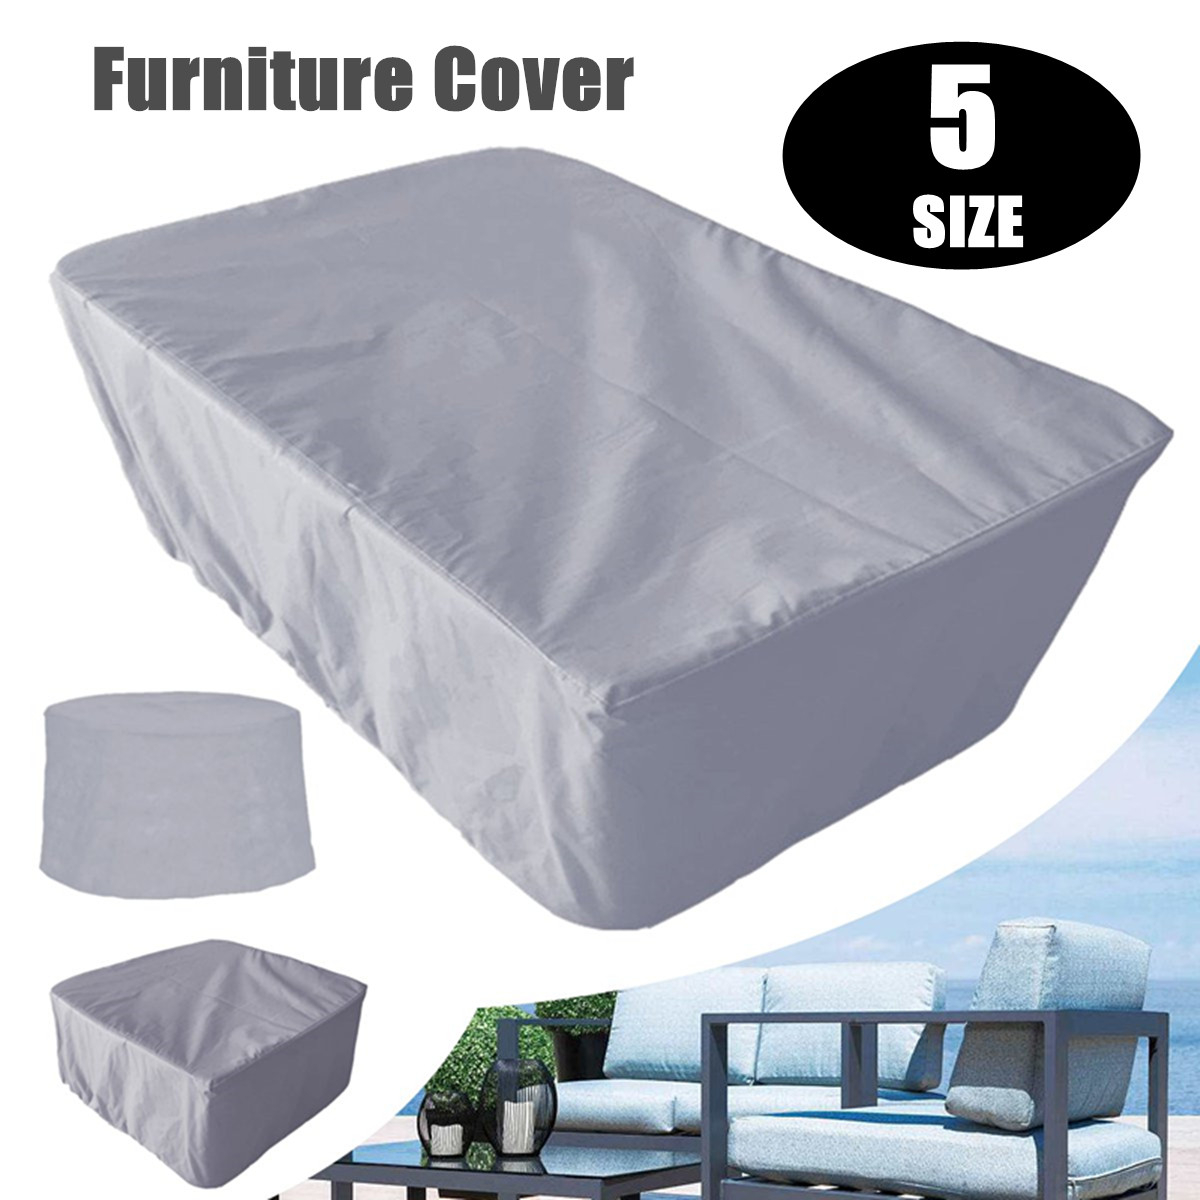 Details About 5 Size Gray Waterproof Garden Patio Furniture Cover Outdoor Shelter U within size 1200 X 1200